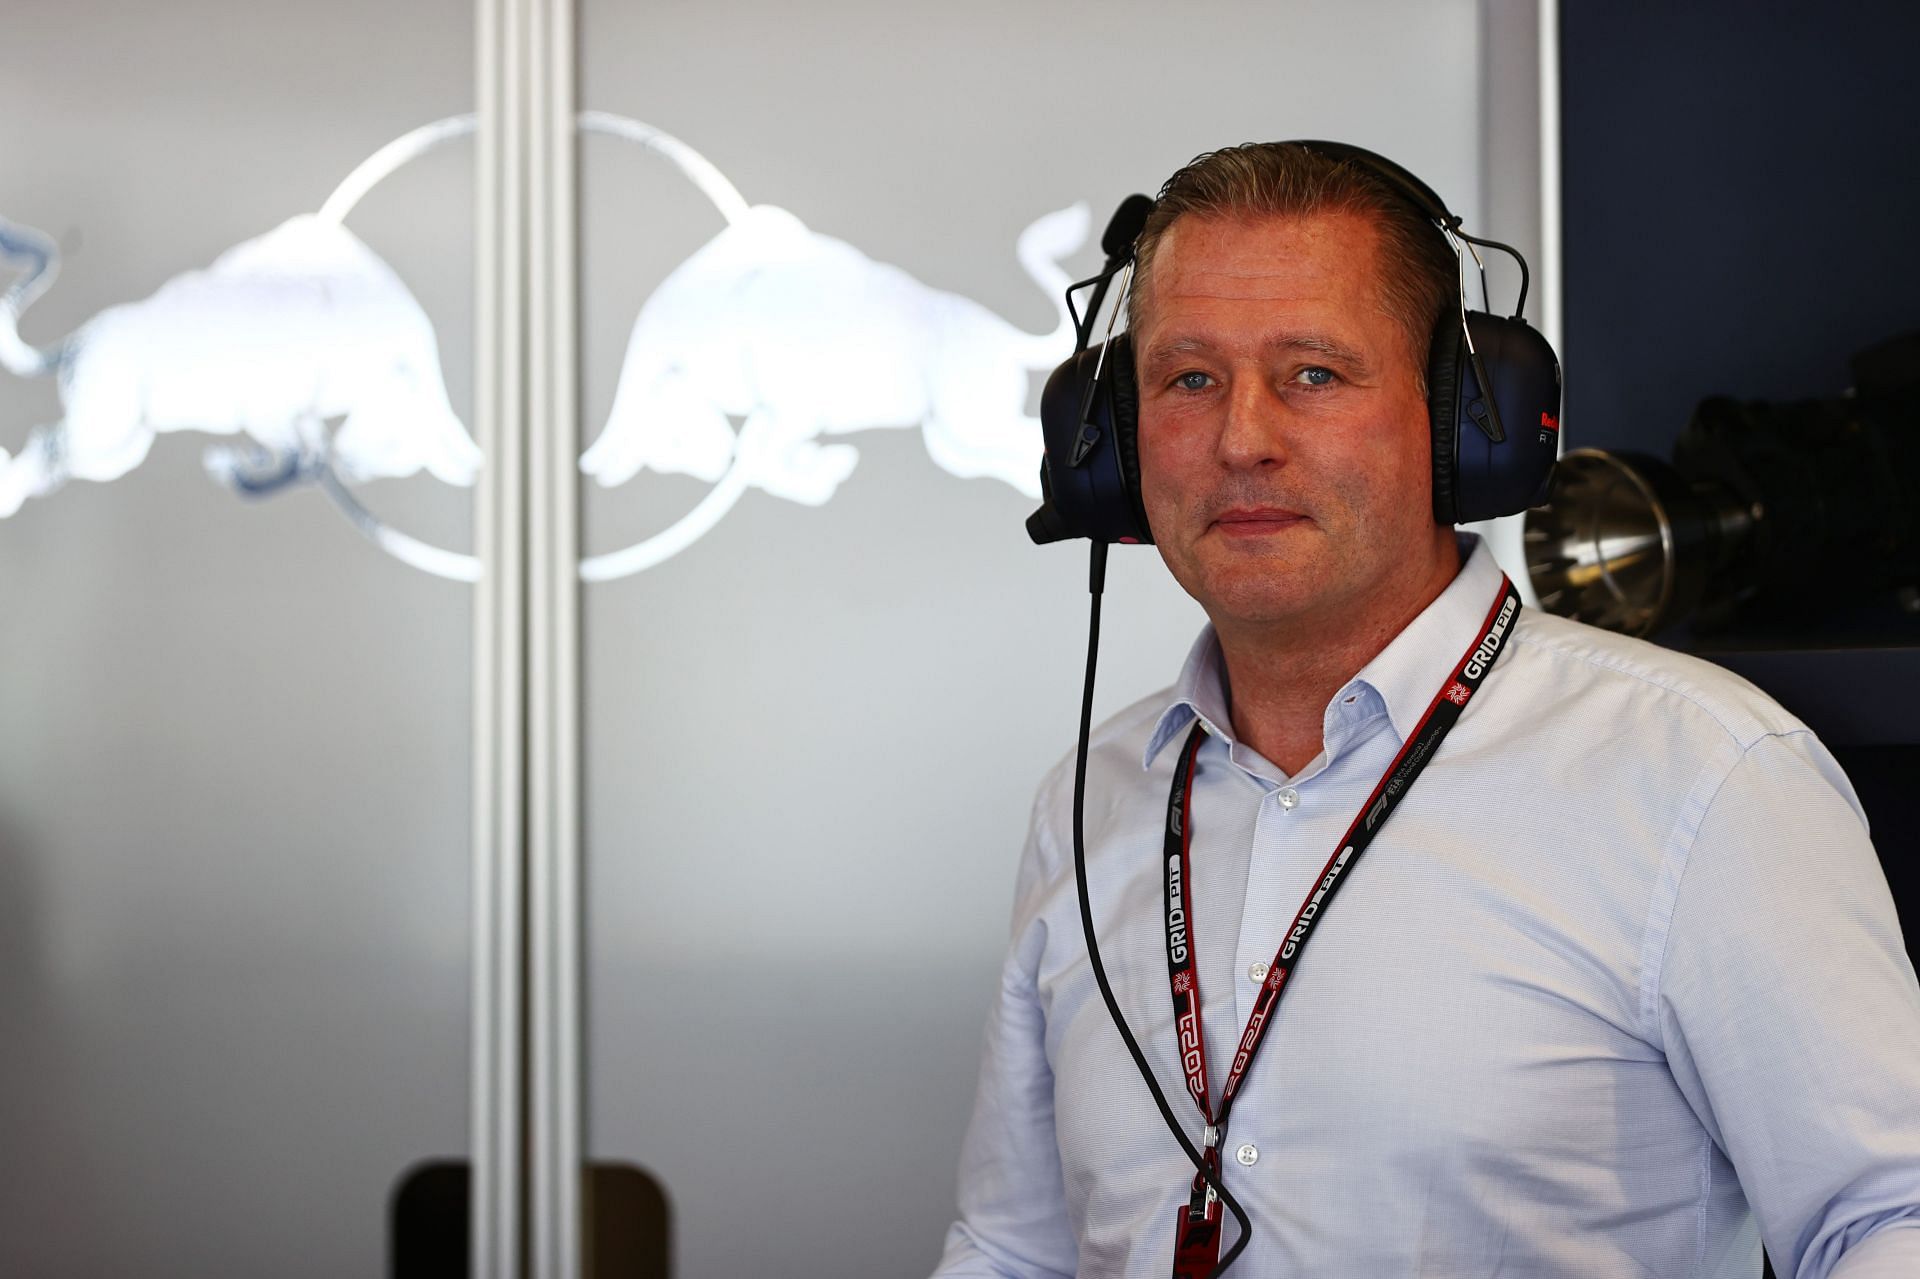 Jos Verstappen at the Red Bull Racing garage at the 2021 F1 United States GP